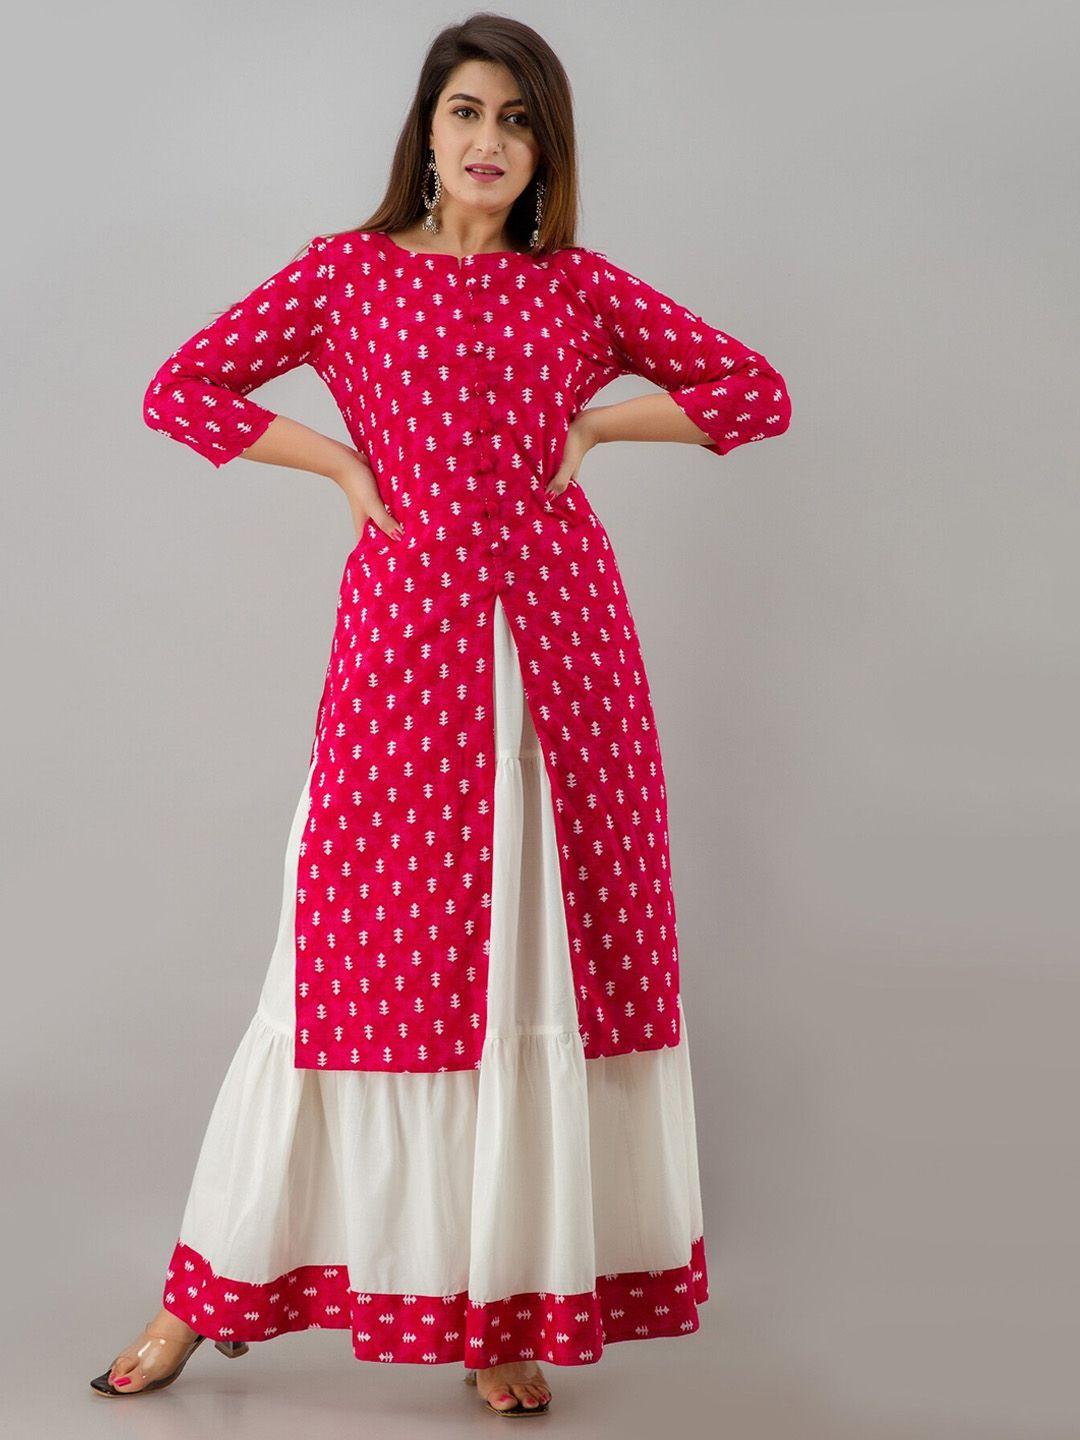 here&now pink & white boat neck ethnic motifs printed kurta with skirt